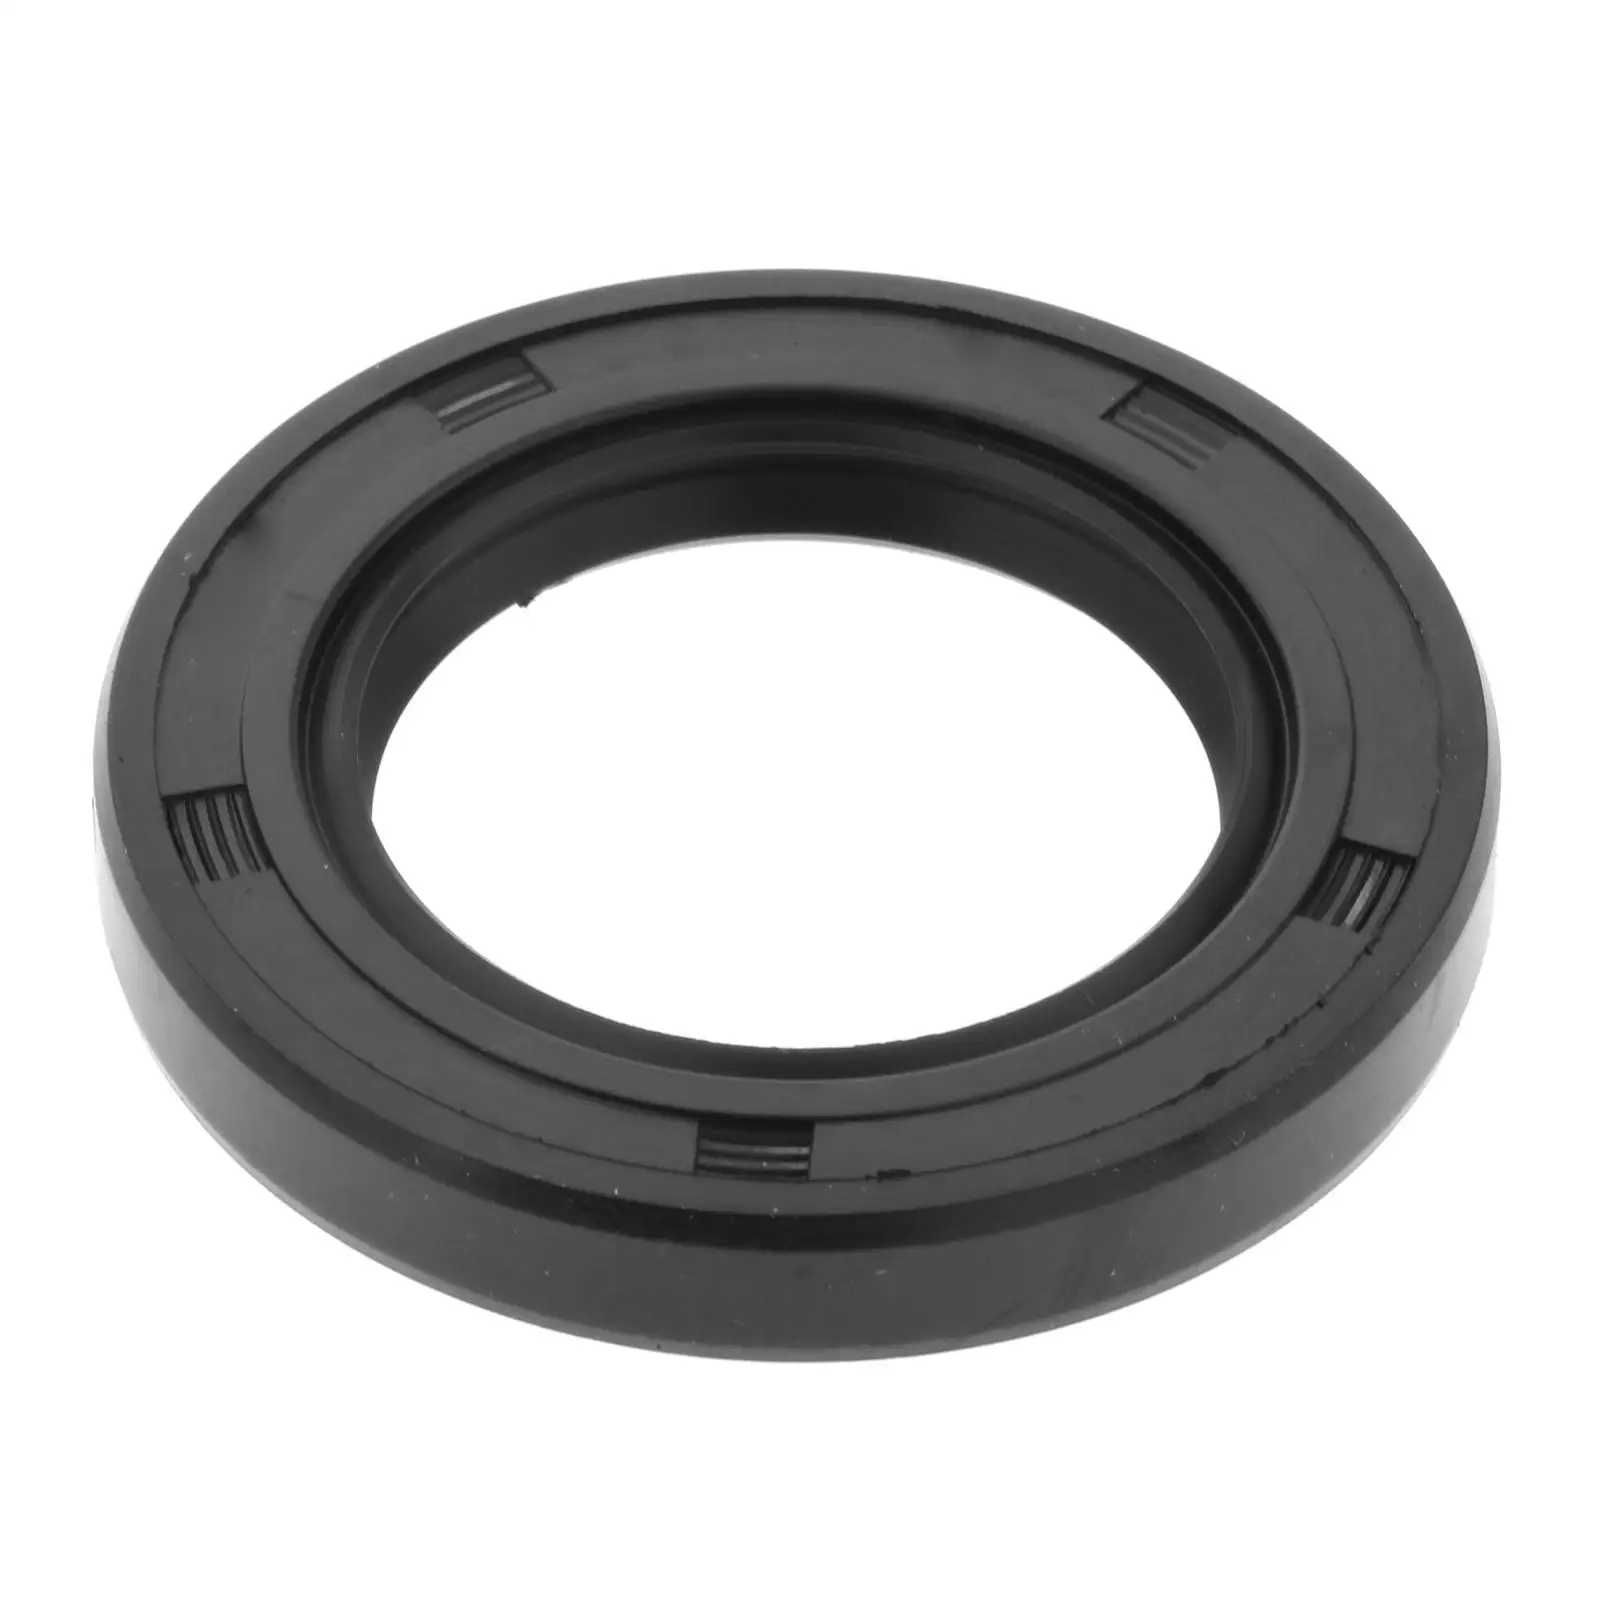 Oil Seal, 93102-30M23, for Yamaha Outboard Motor Durable Direct Replaces Easy to Install